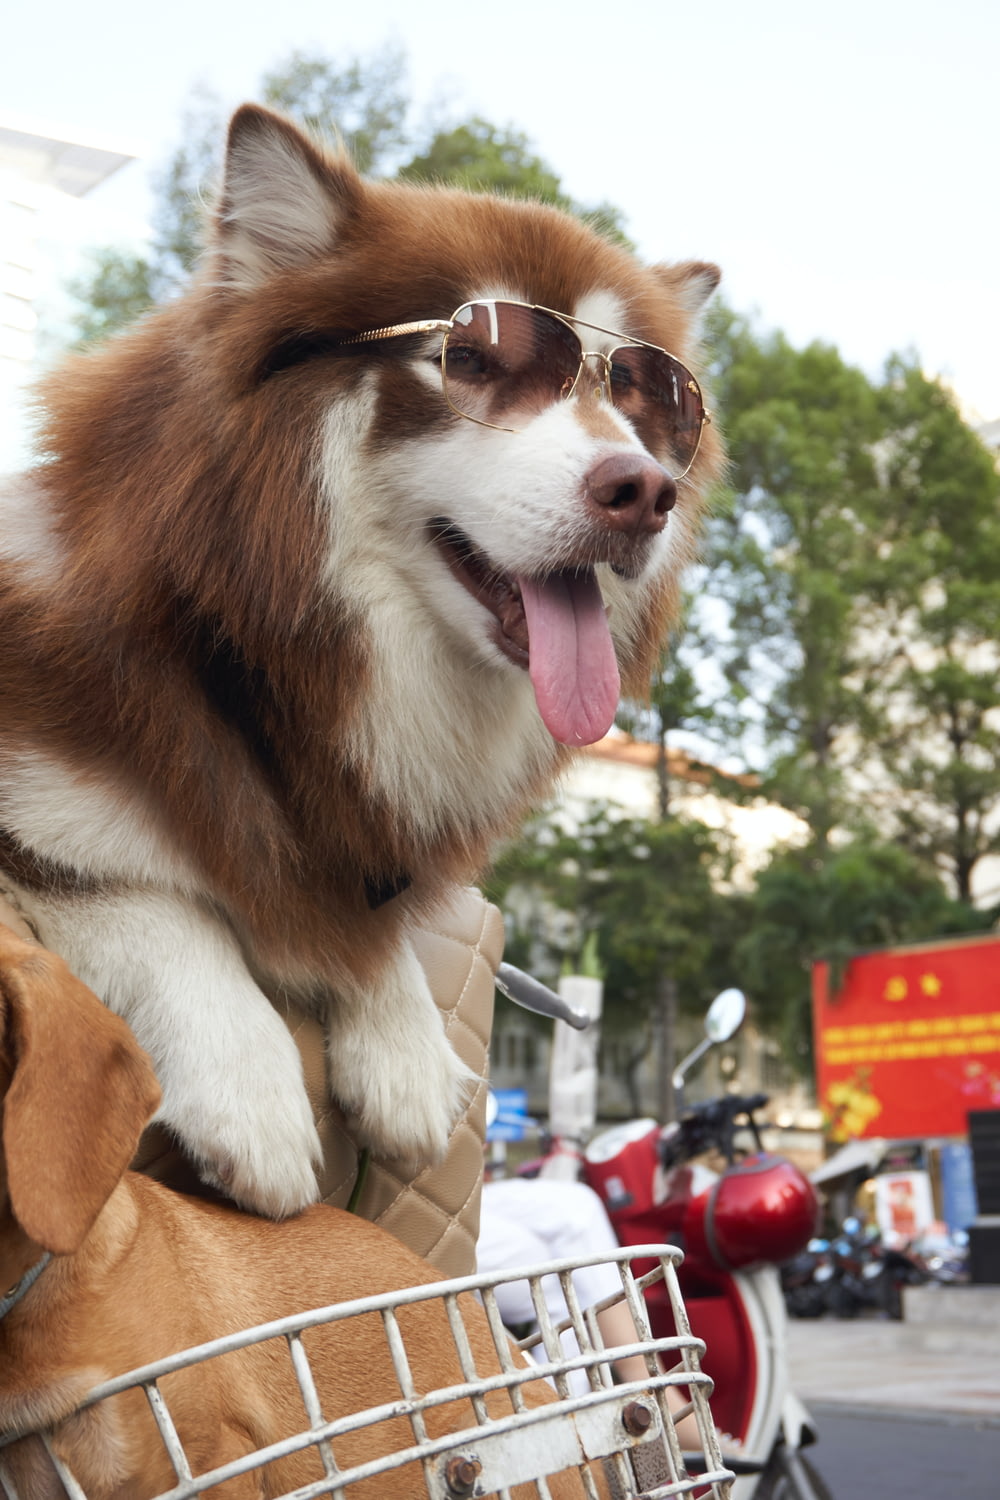 a brown and white dog wearing sunglasses riding on the back of a motorcycle